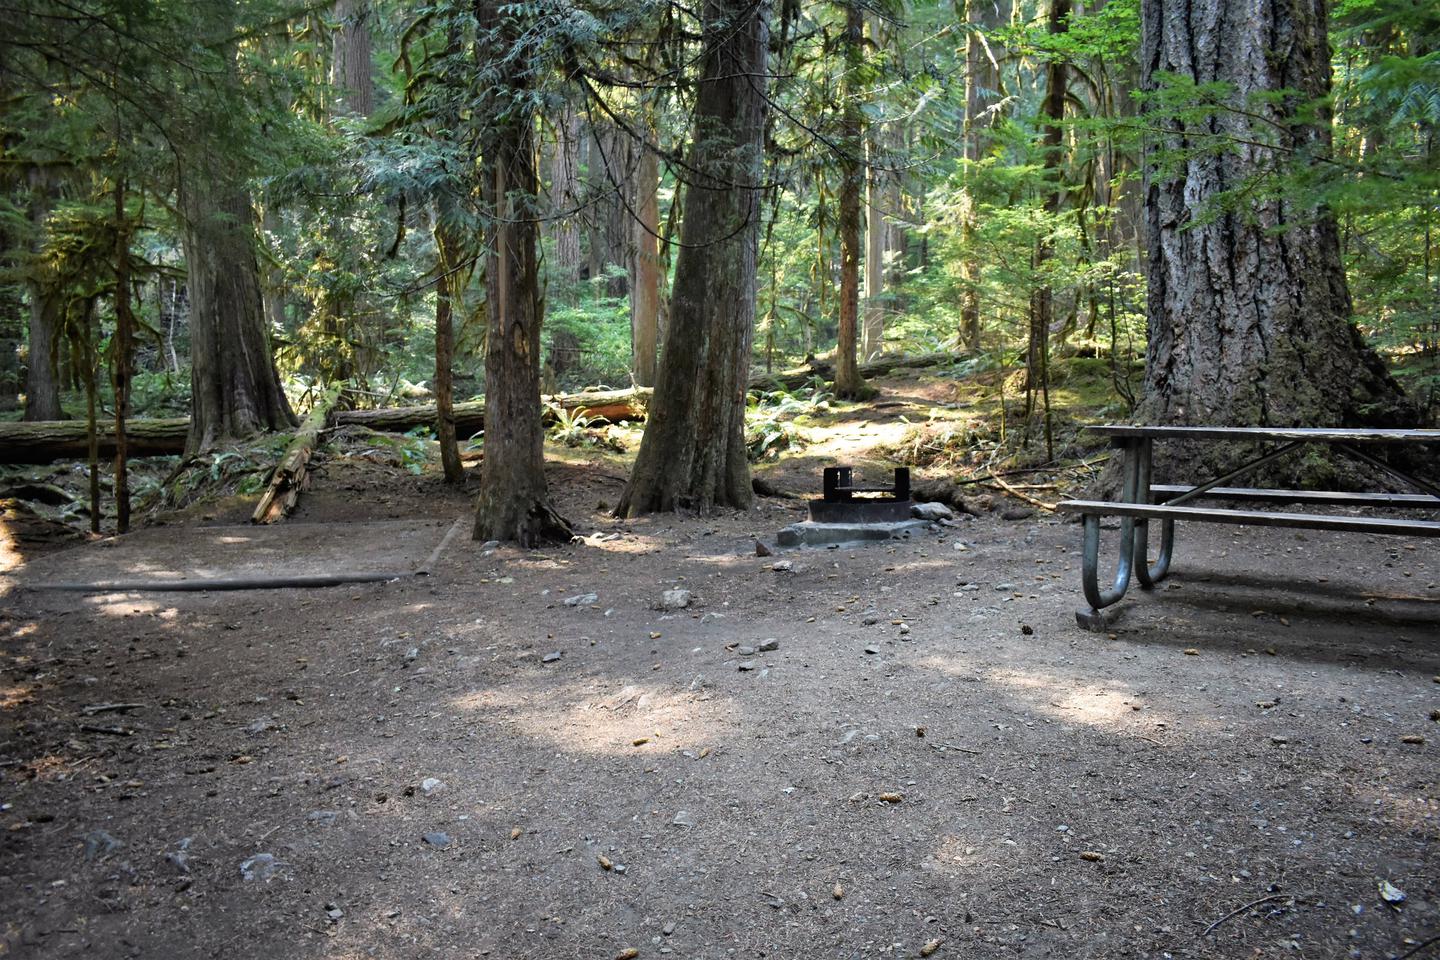 Tent pad, fire ring, and picnic tableView of campsite